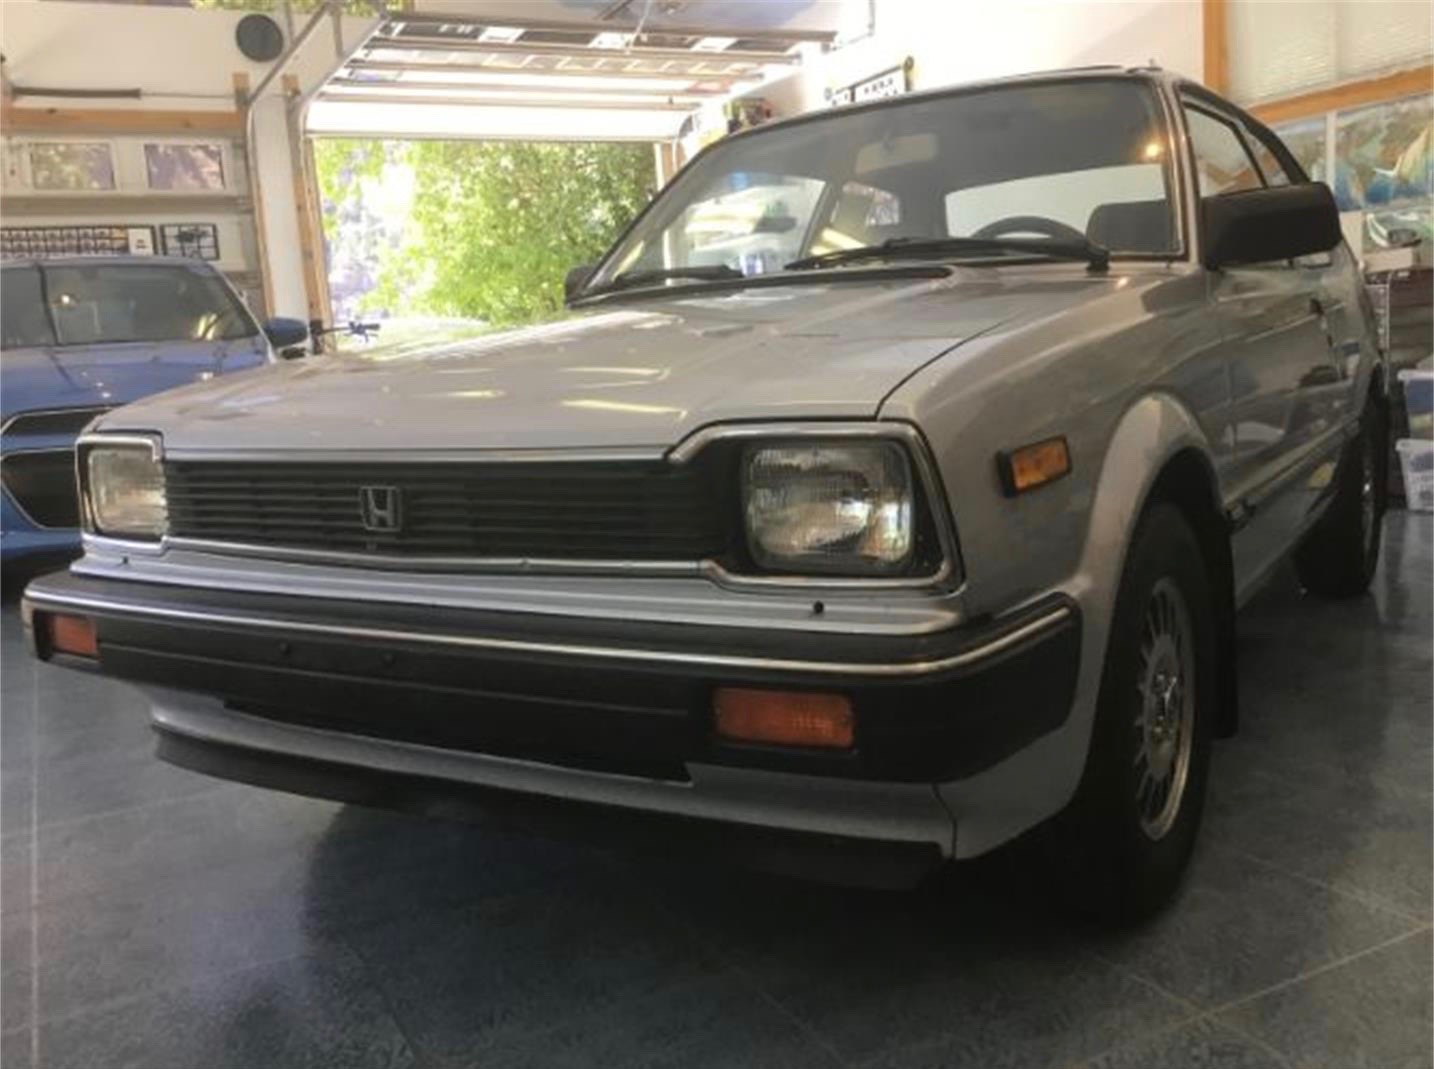 Civic, This 1982 Honda Civic is a time-capsule example, ClassicCars.com Journal